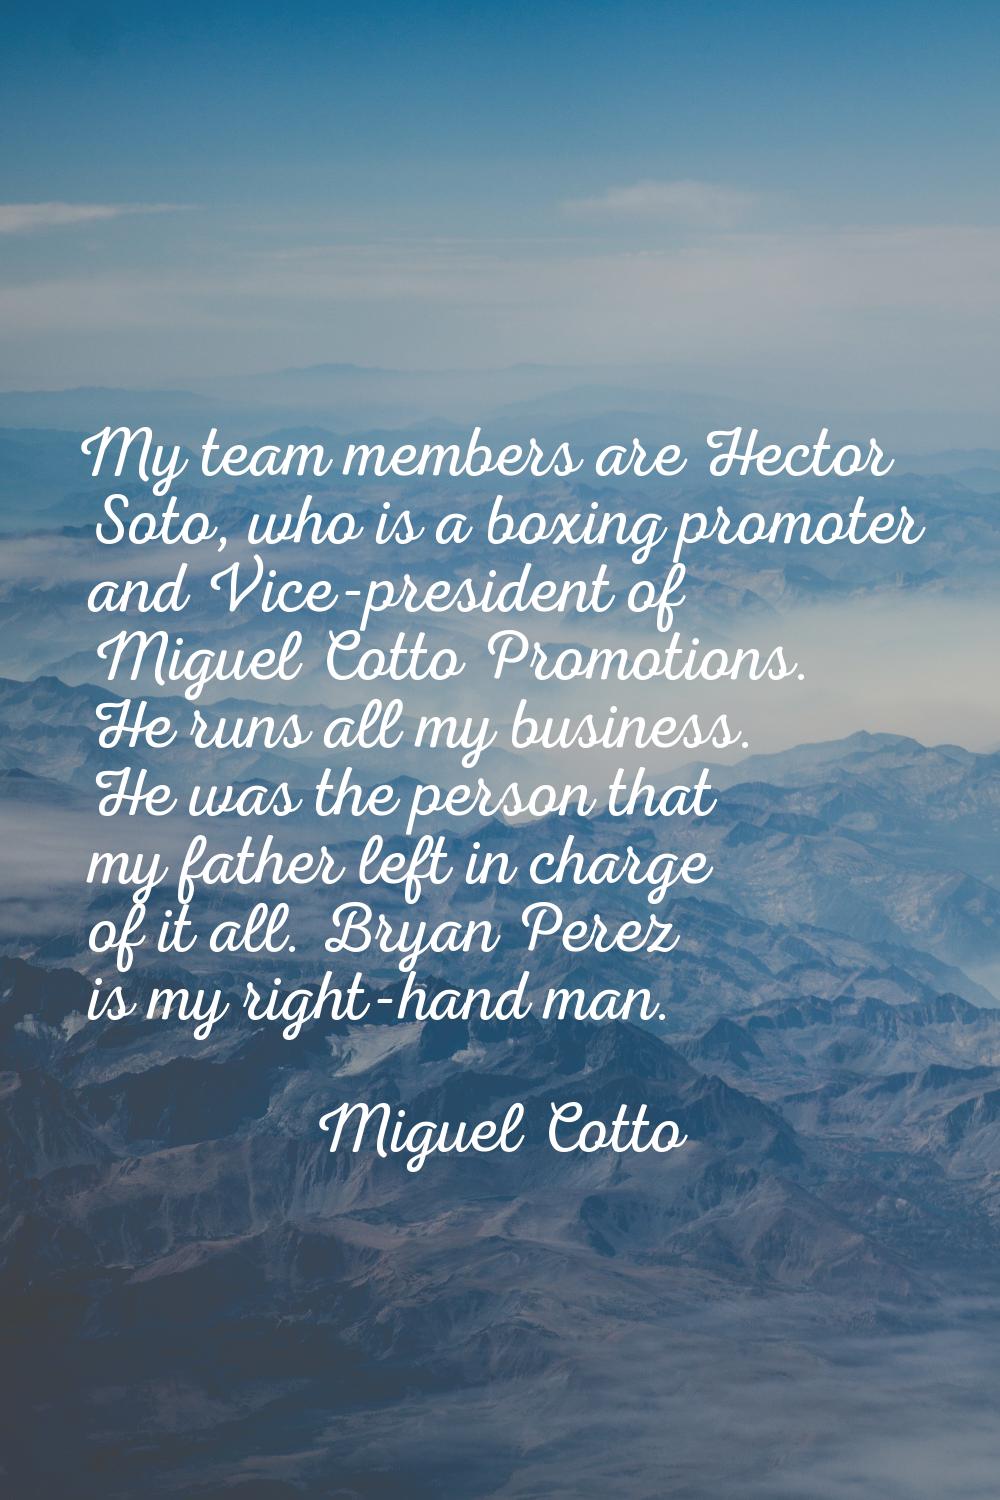 My team members are Hector Soto, who is a boxing promoter and Vice-president of Miguel Cotto Promot